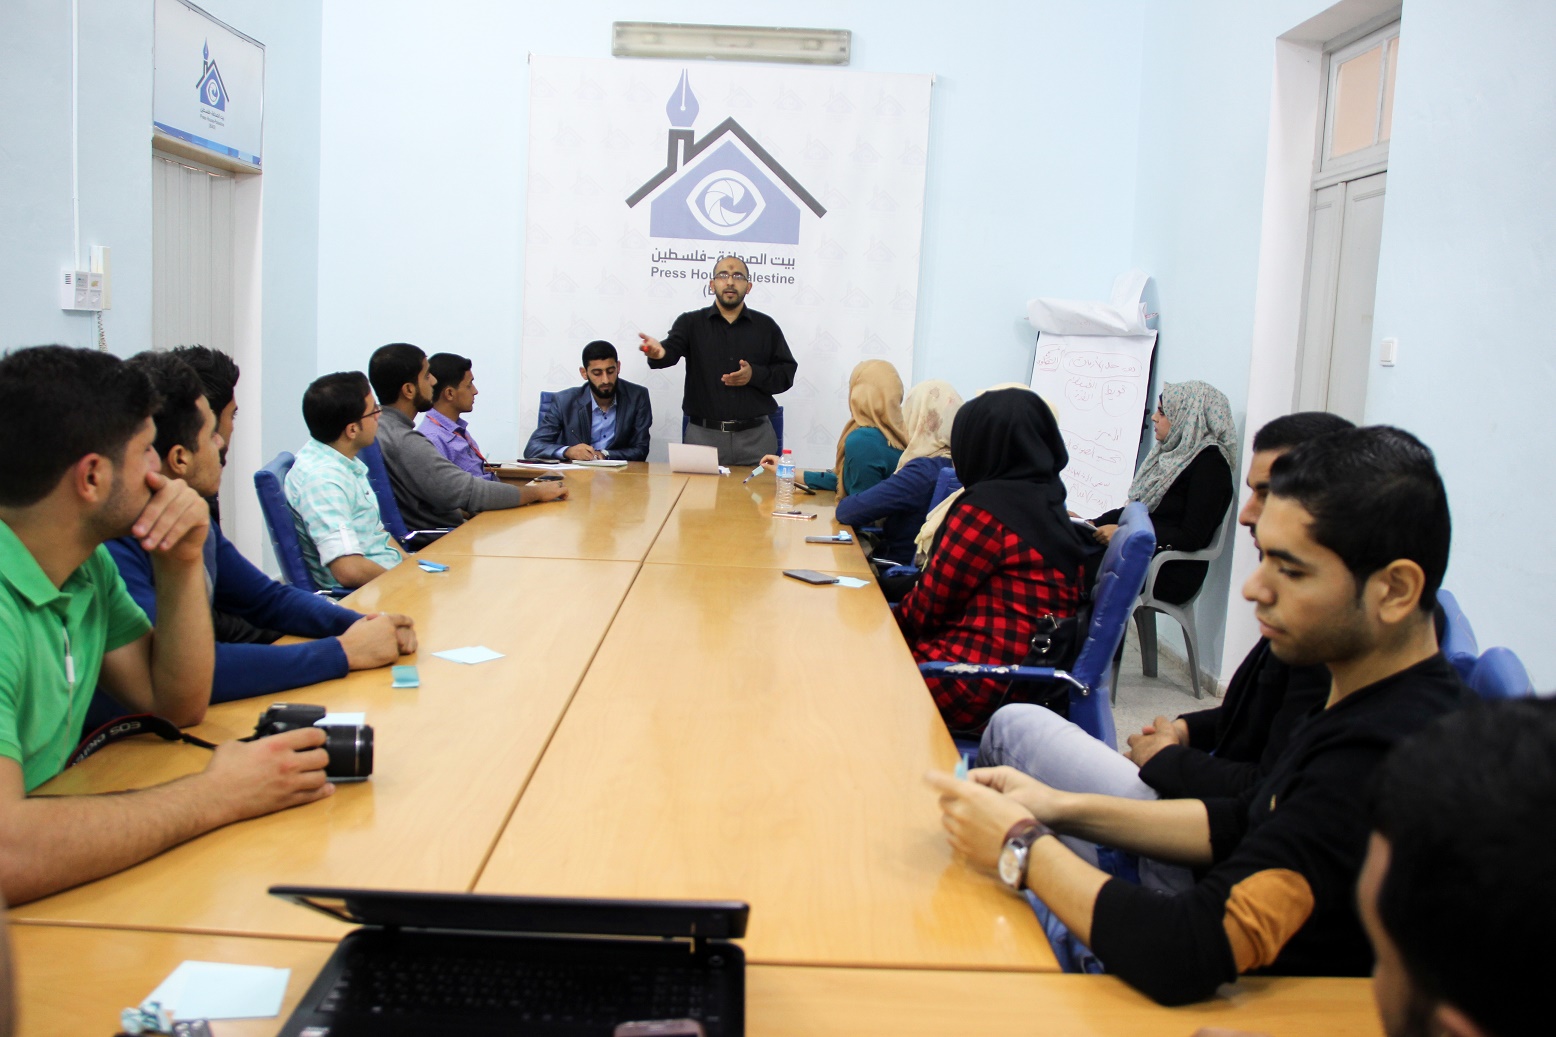 In cooperation with Press House… Media College of Al-Aqsa University Organizes A workshop About Public Relations